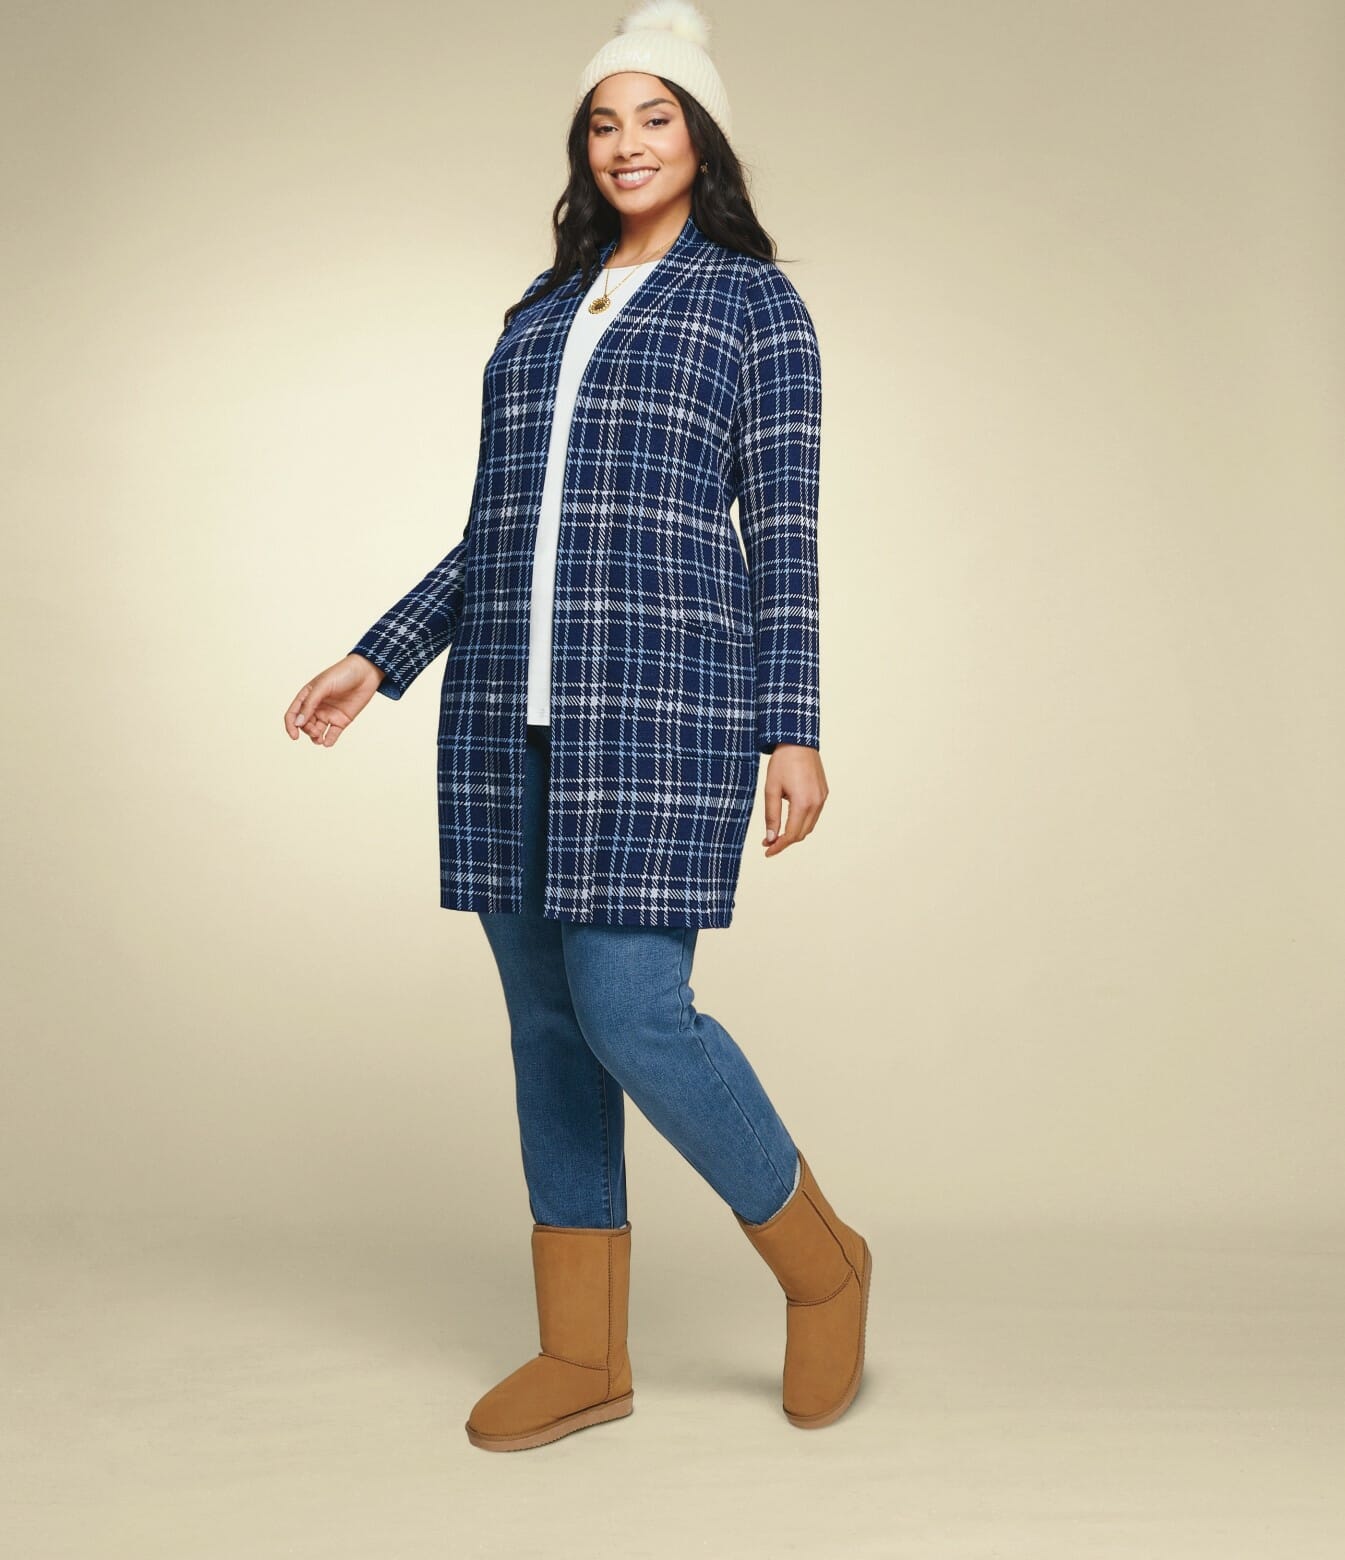 plus-size model wearing a plaid cardigan, jeans, and boots